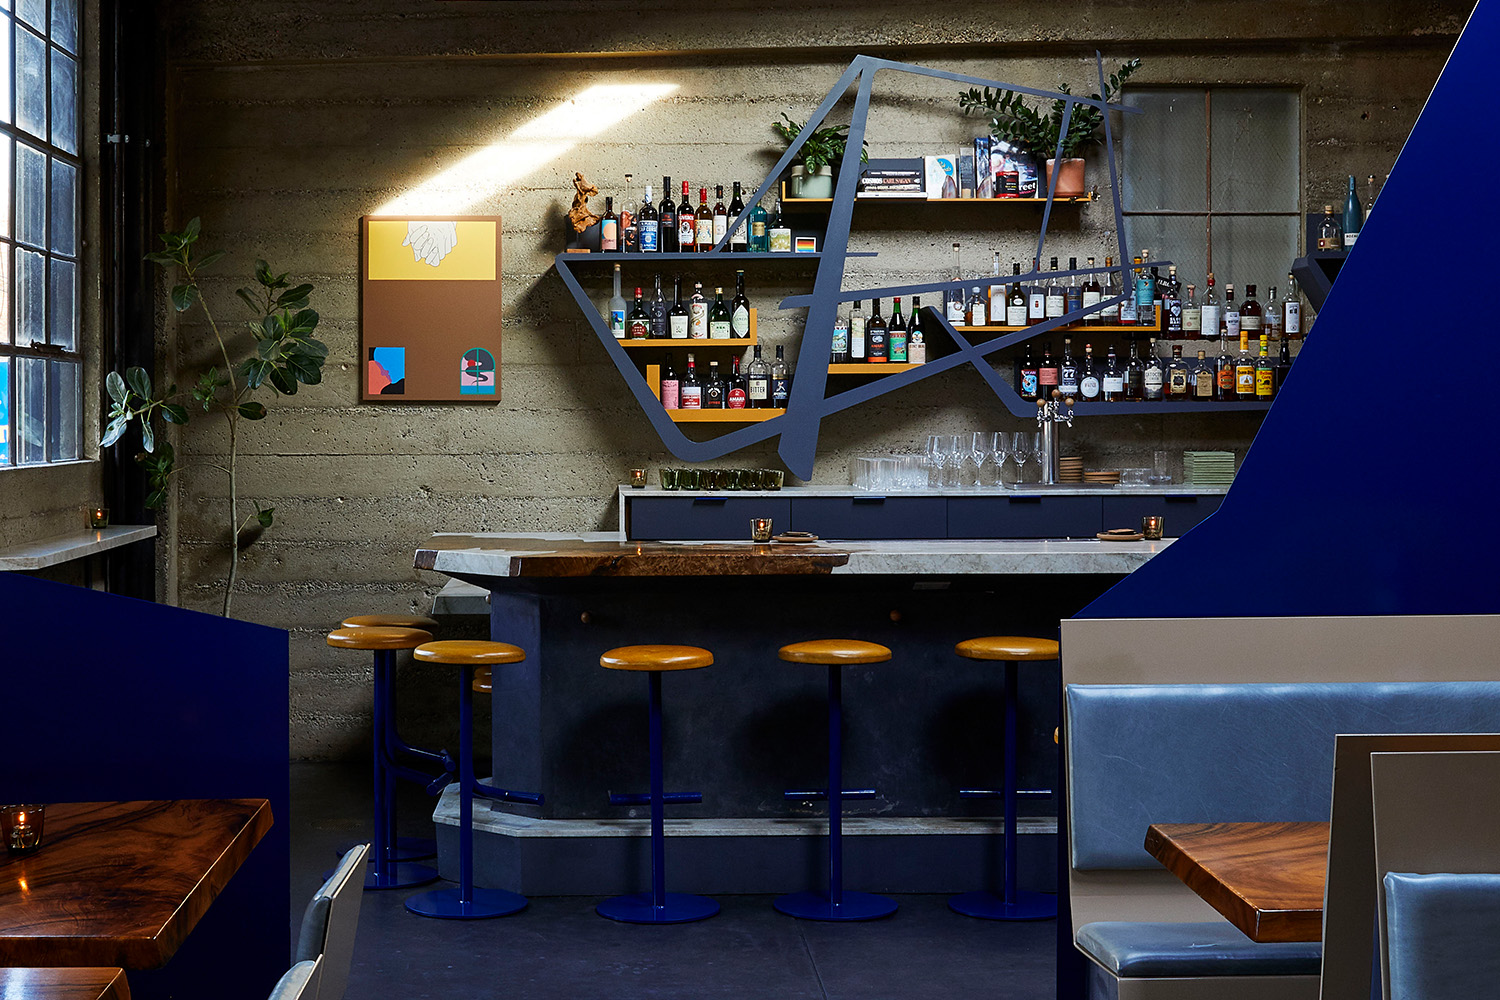 Blue bar against a cement wall with bottles on shelves.